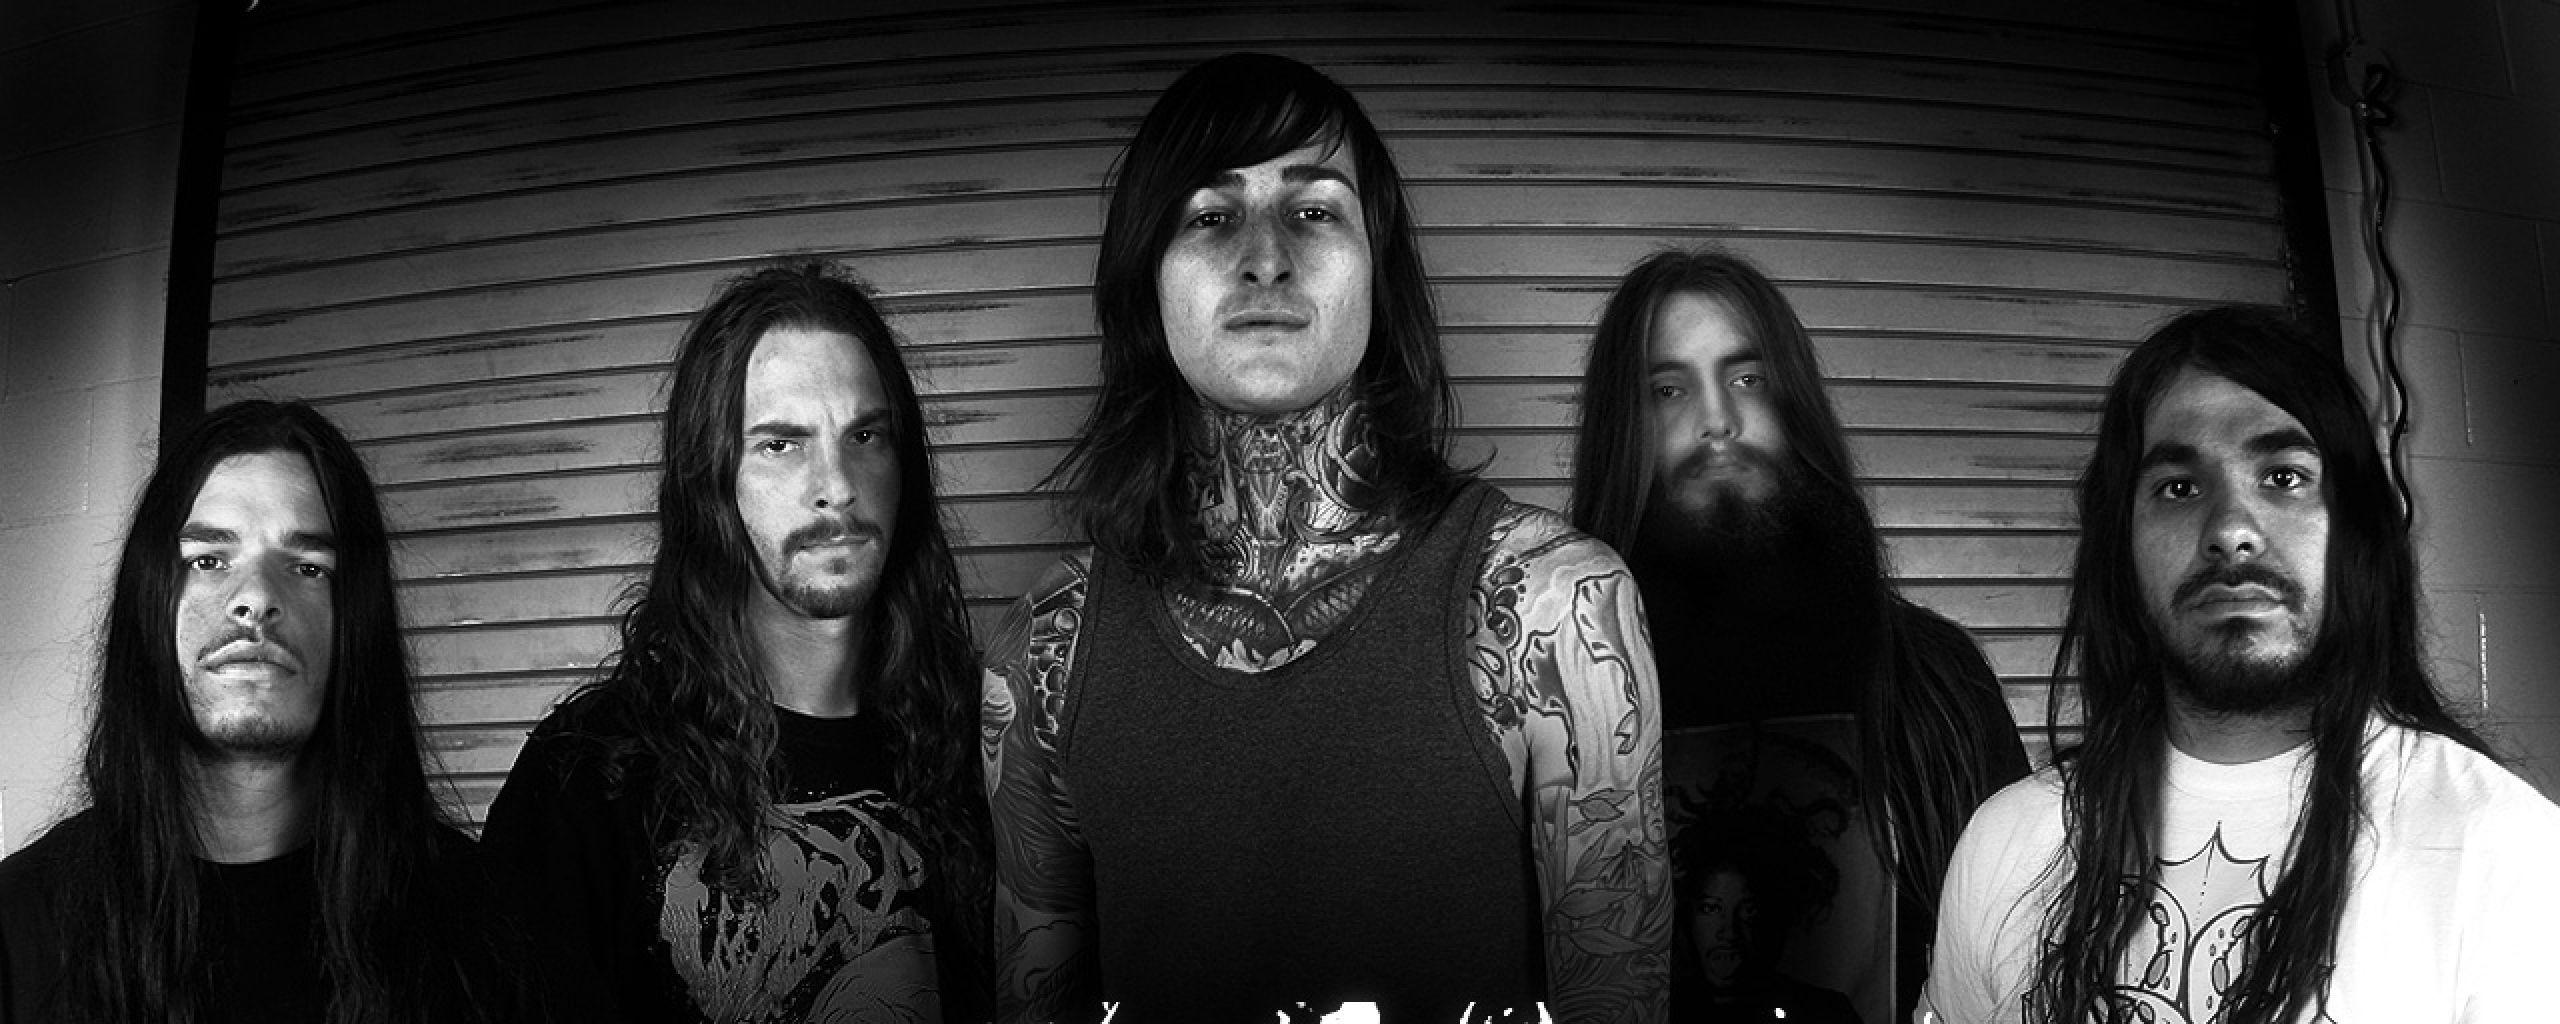 Download Wallpaper 2560x1024 Suicide silence, Band, Members, Name